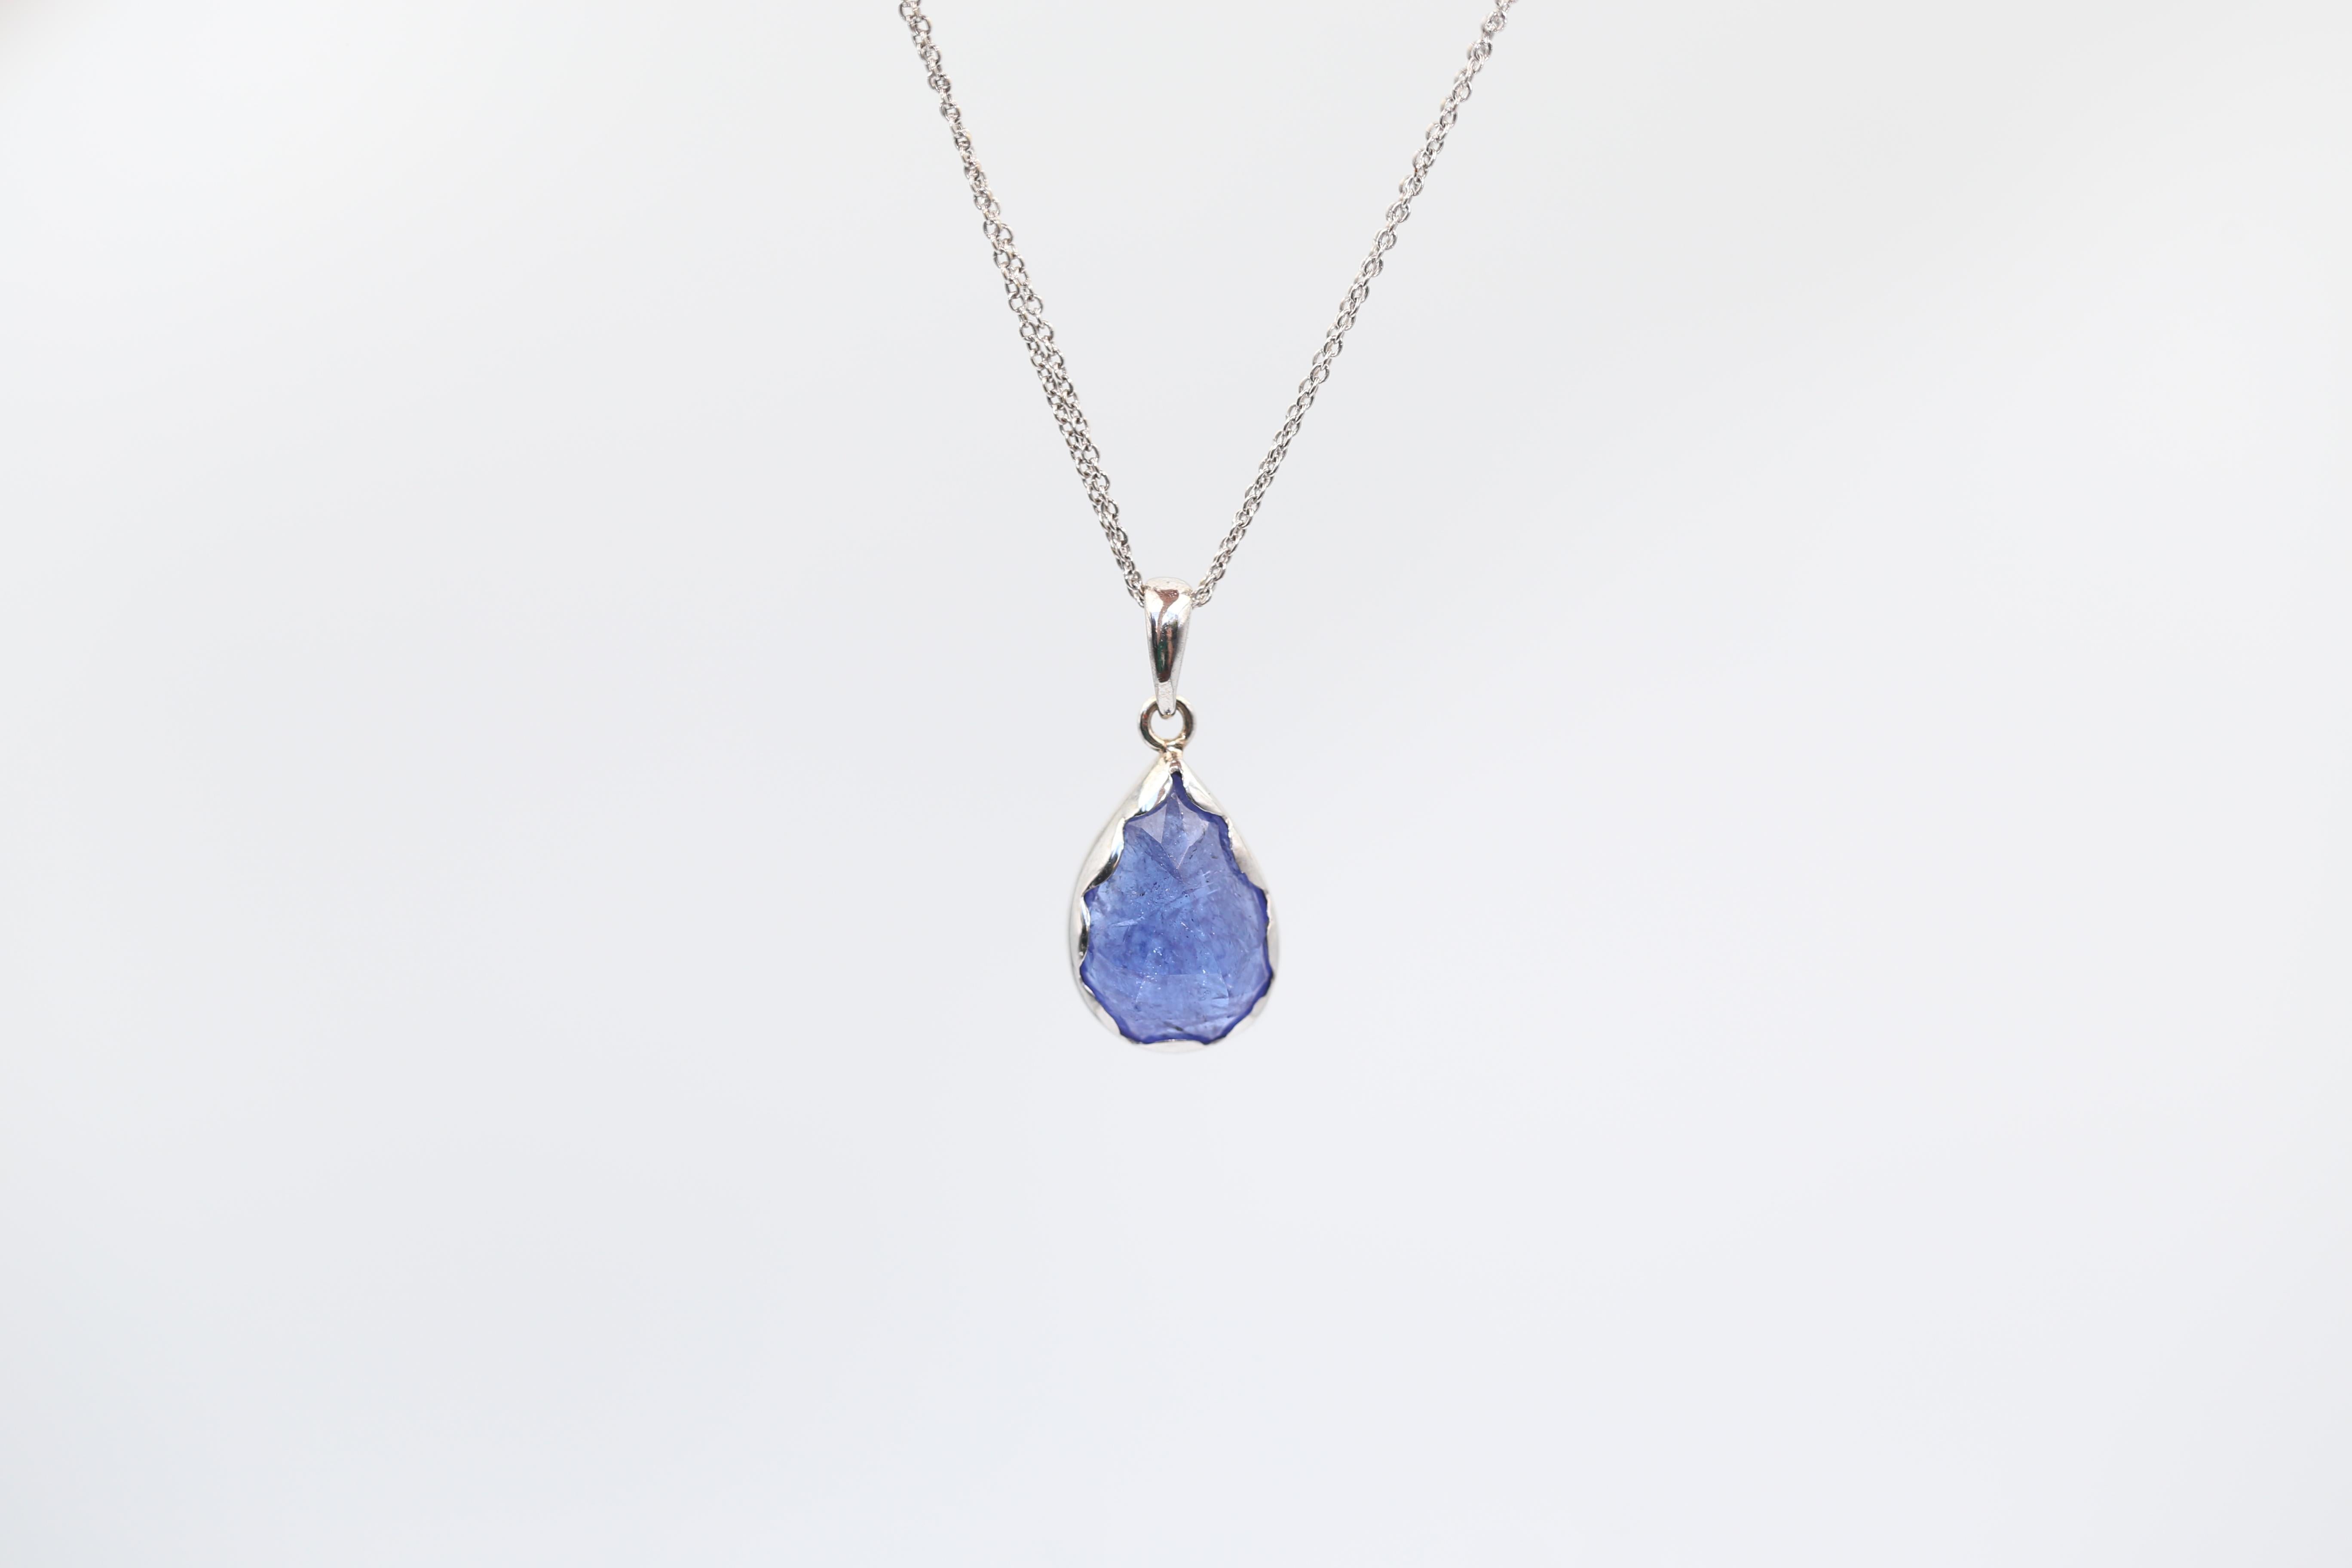 Tanzanite Natural Pendant White Gold Chain Italy, 2020

A natural Tanzanite pear-shaped stone is set in a White Gold Cast.

The stone is not transparent but it has a marvellous natural structure and inclusions that reflect light. As if many million